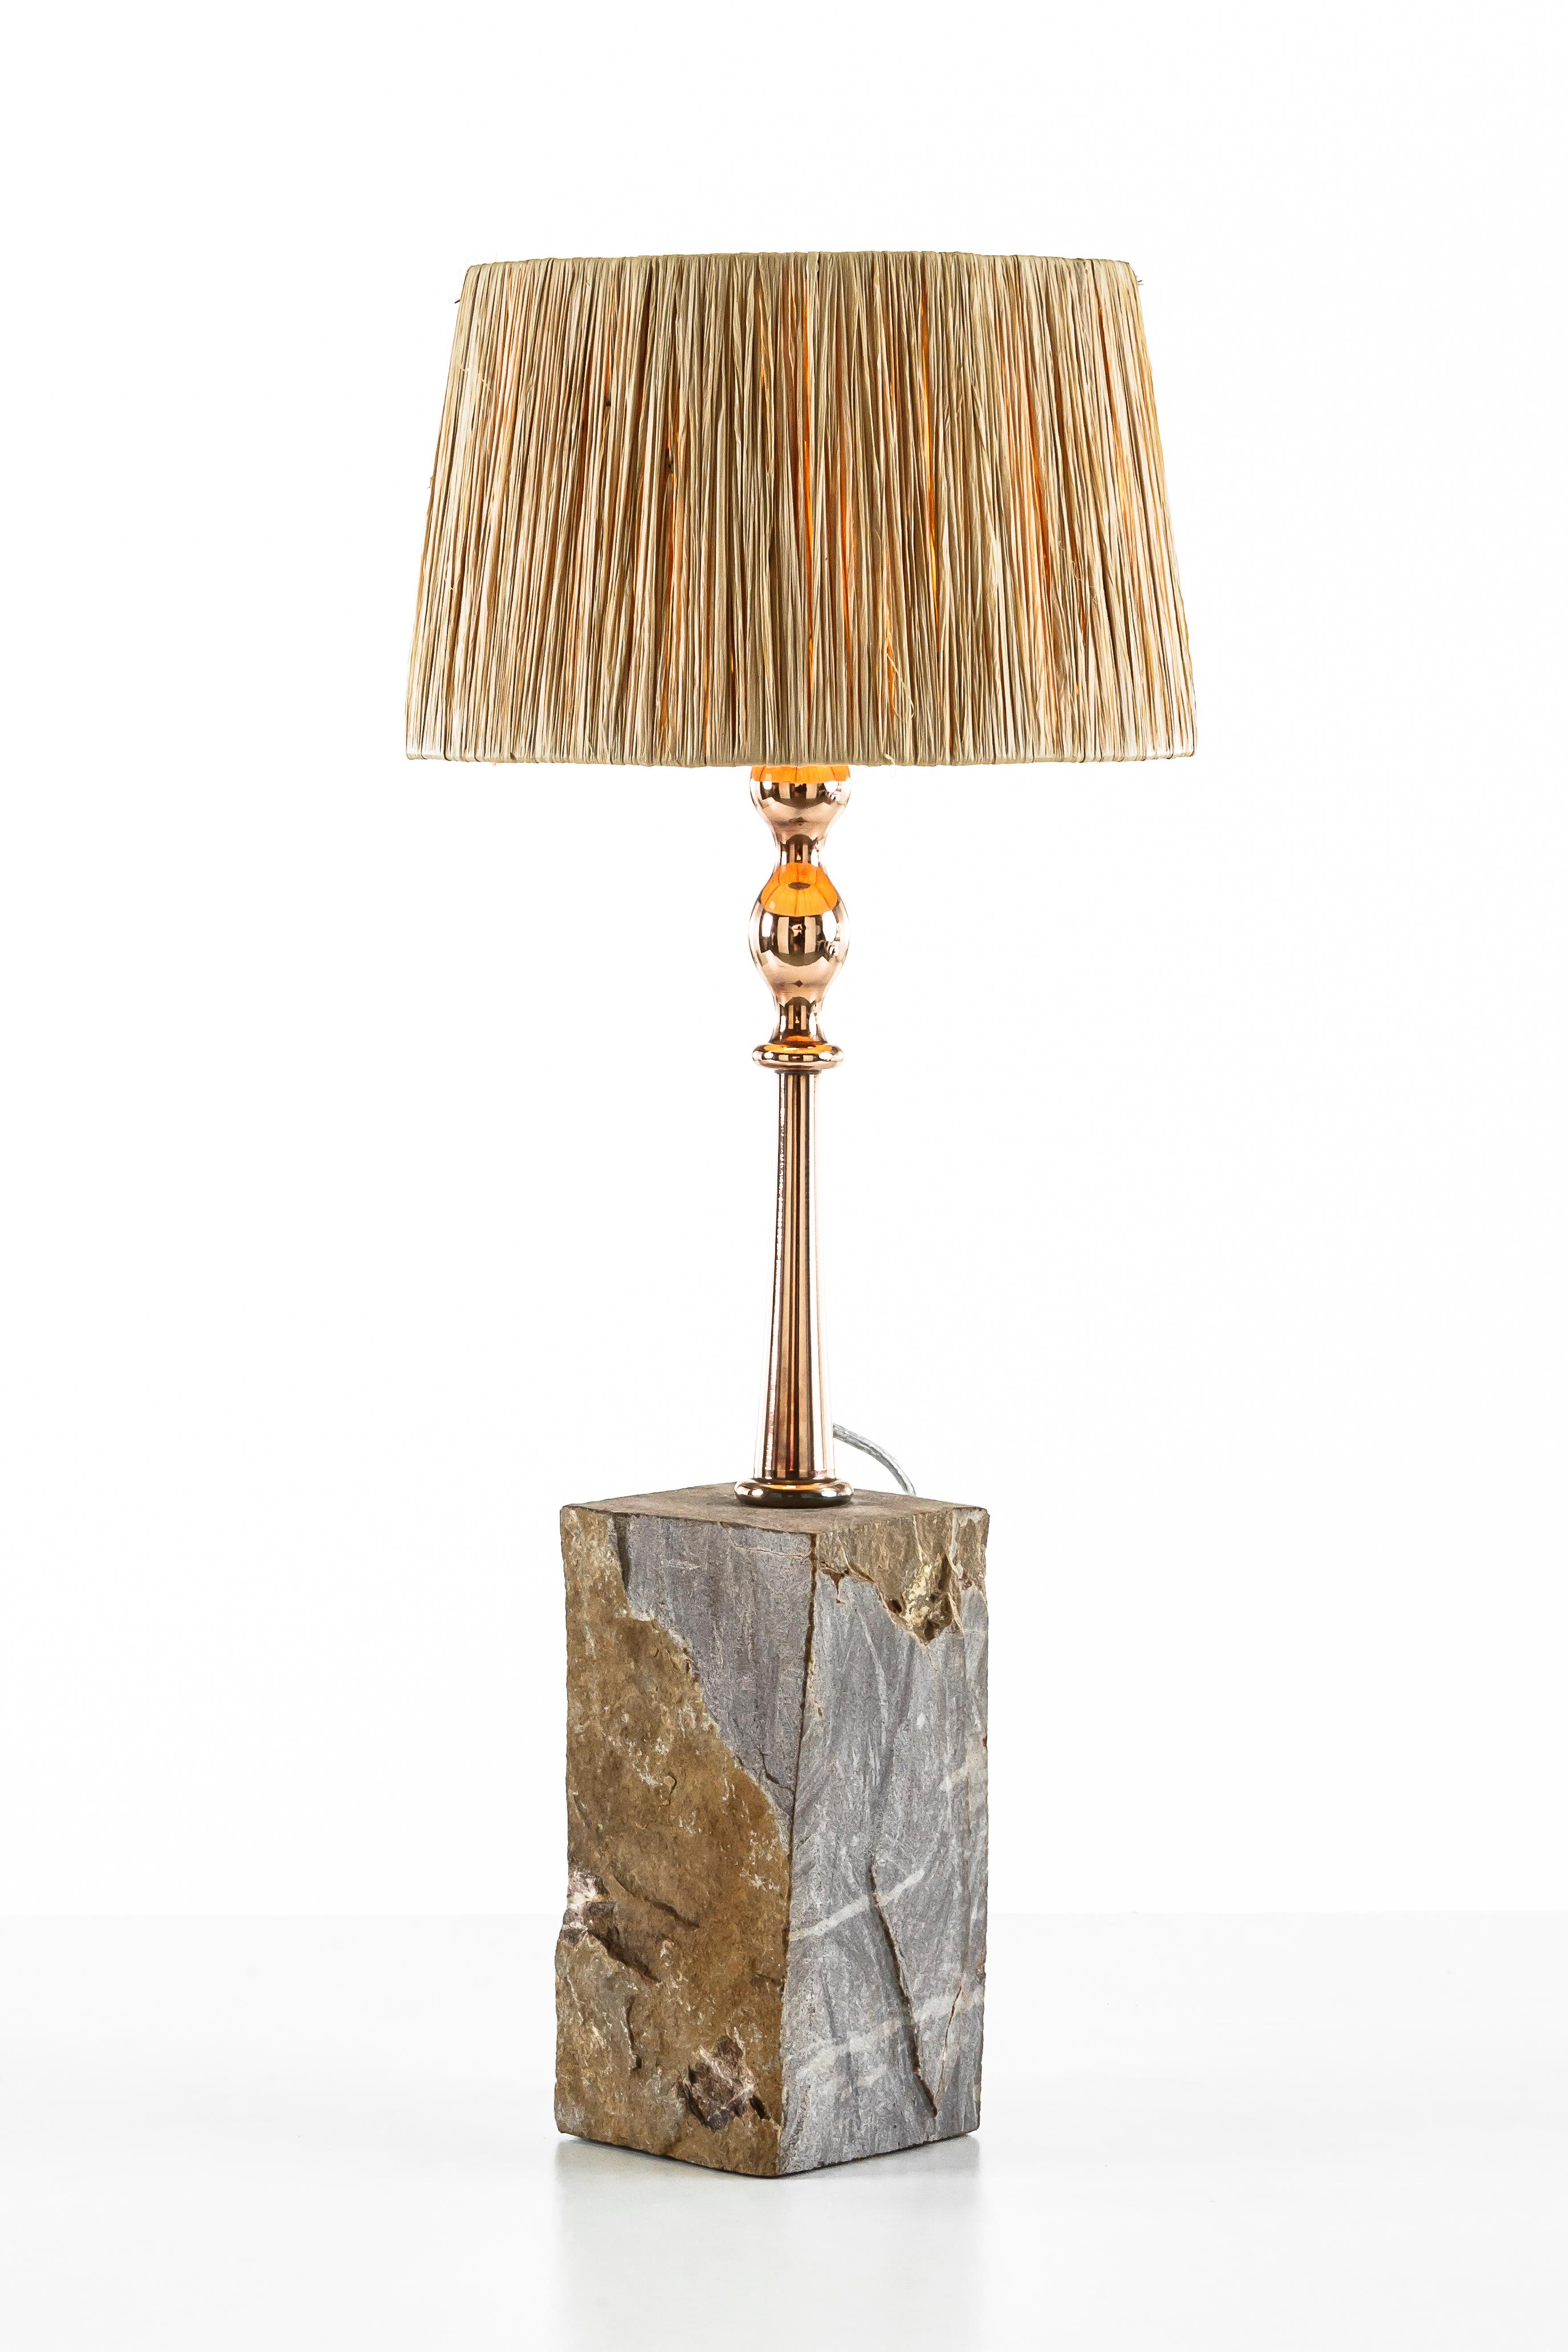 Stone Table Lamp by Egg Designs
Dimensions: 10 L X 10 D X 58 H cm
Materials: Chiseled Stone, Copper Plated Steel

Founded by South Africans and life partners, Greg and Roche Dry - Egg is a unique perspective in contemporary furniture inspired